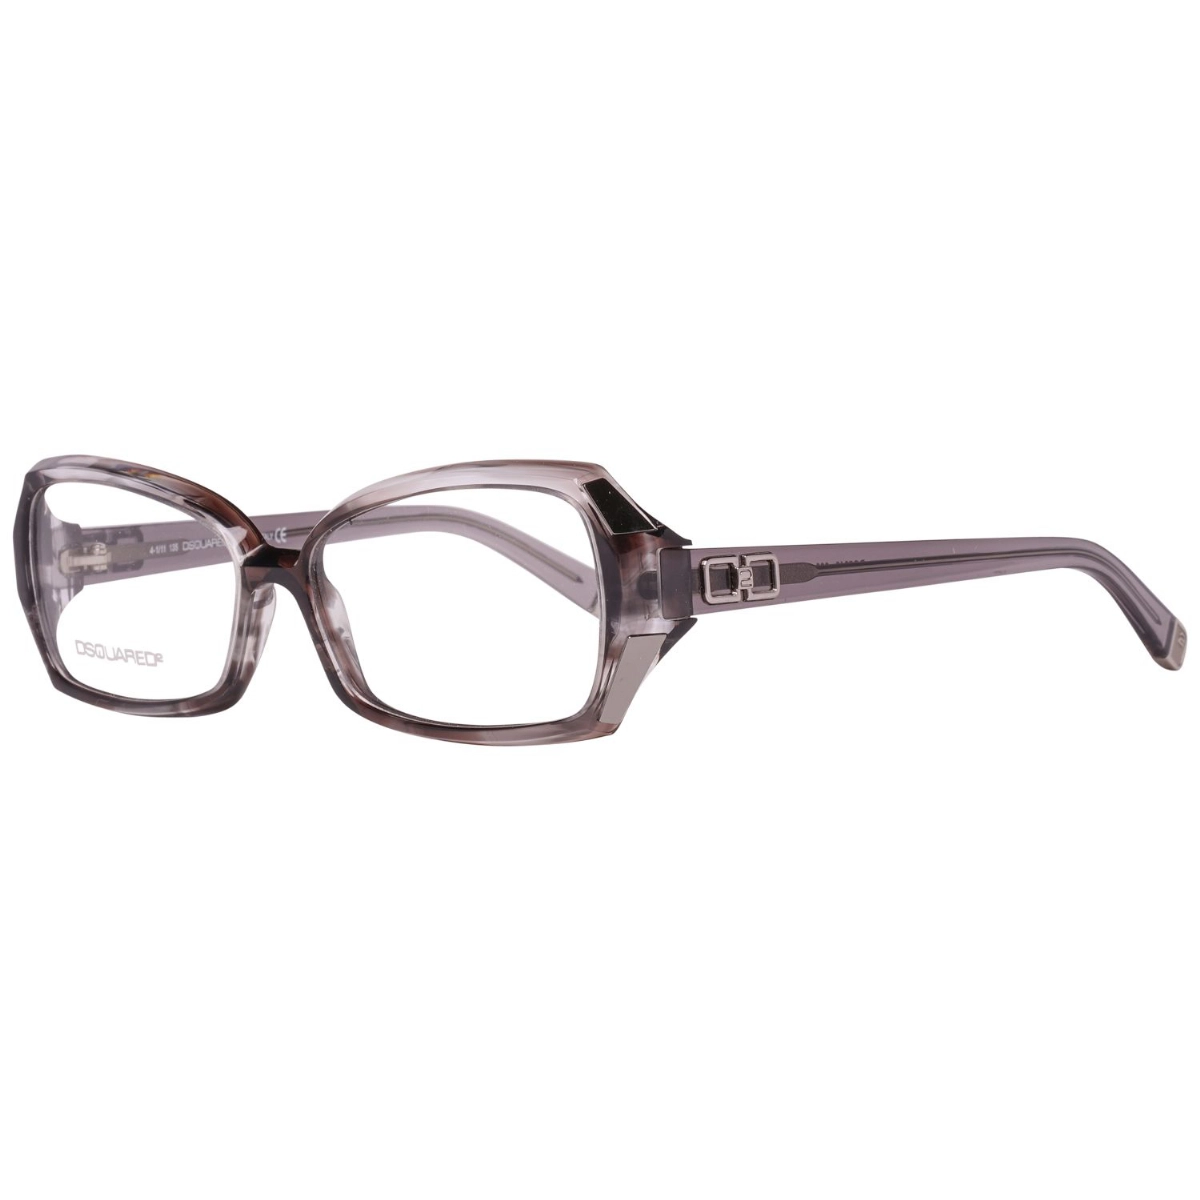 GLASSES FOR WOMAN DSQUARED2 DQ5049-020-54